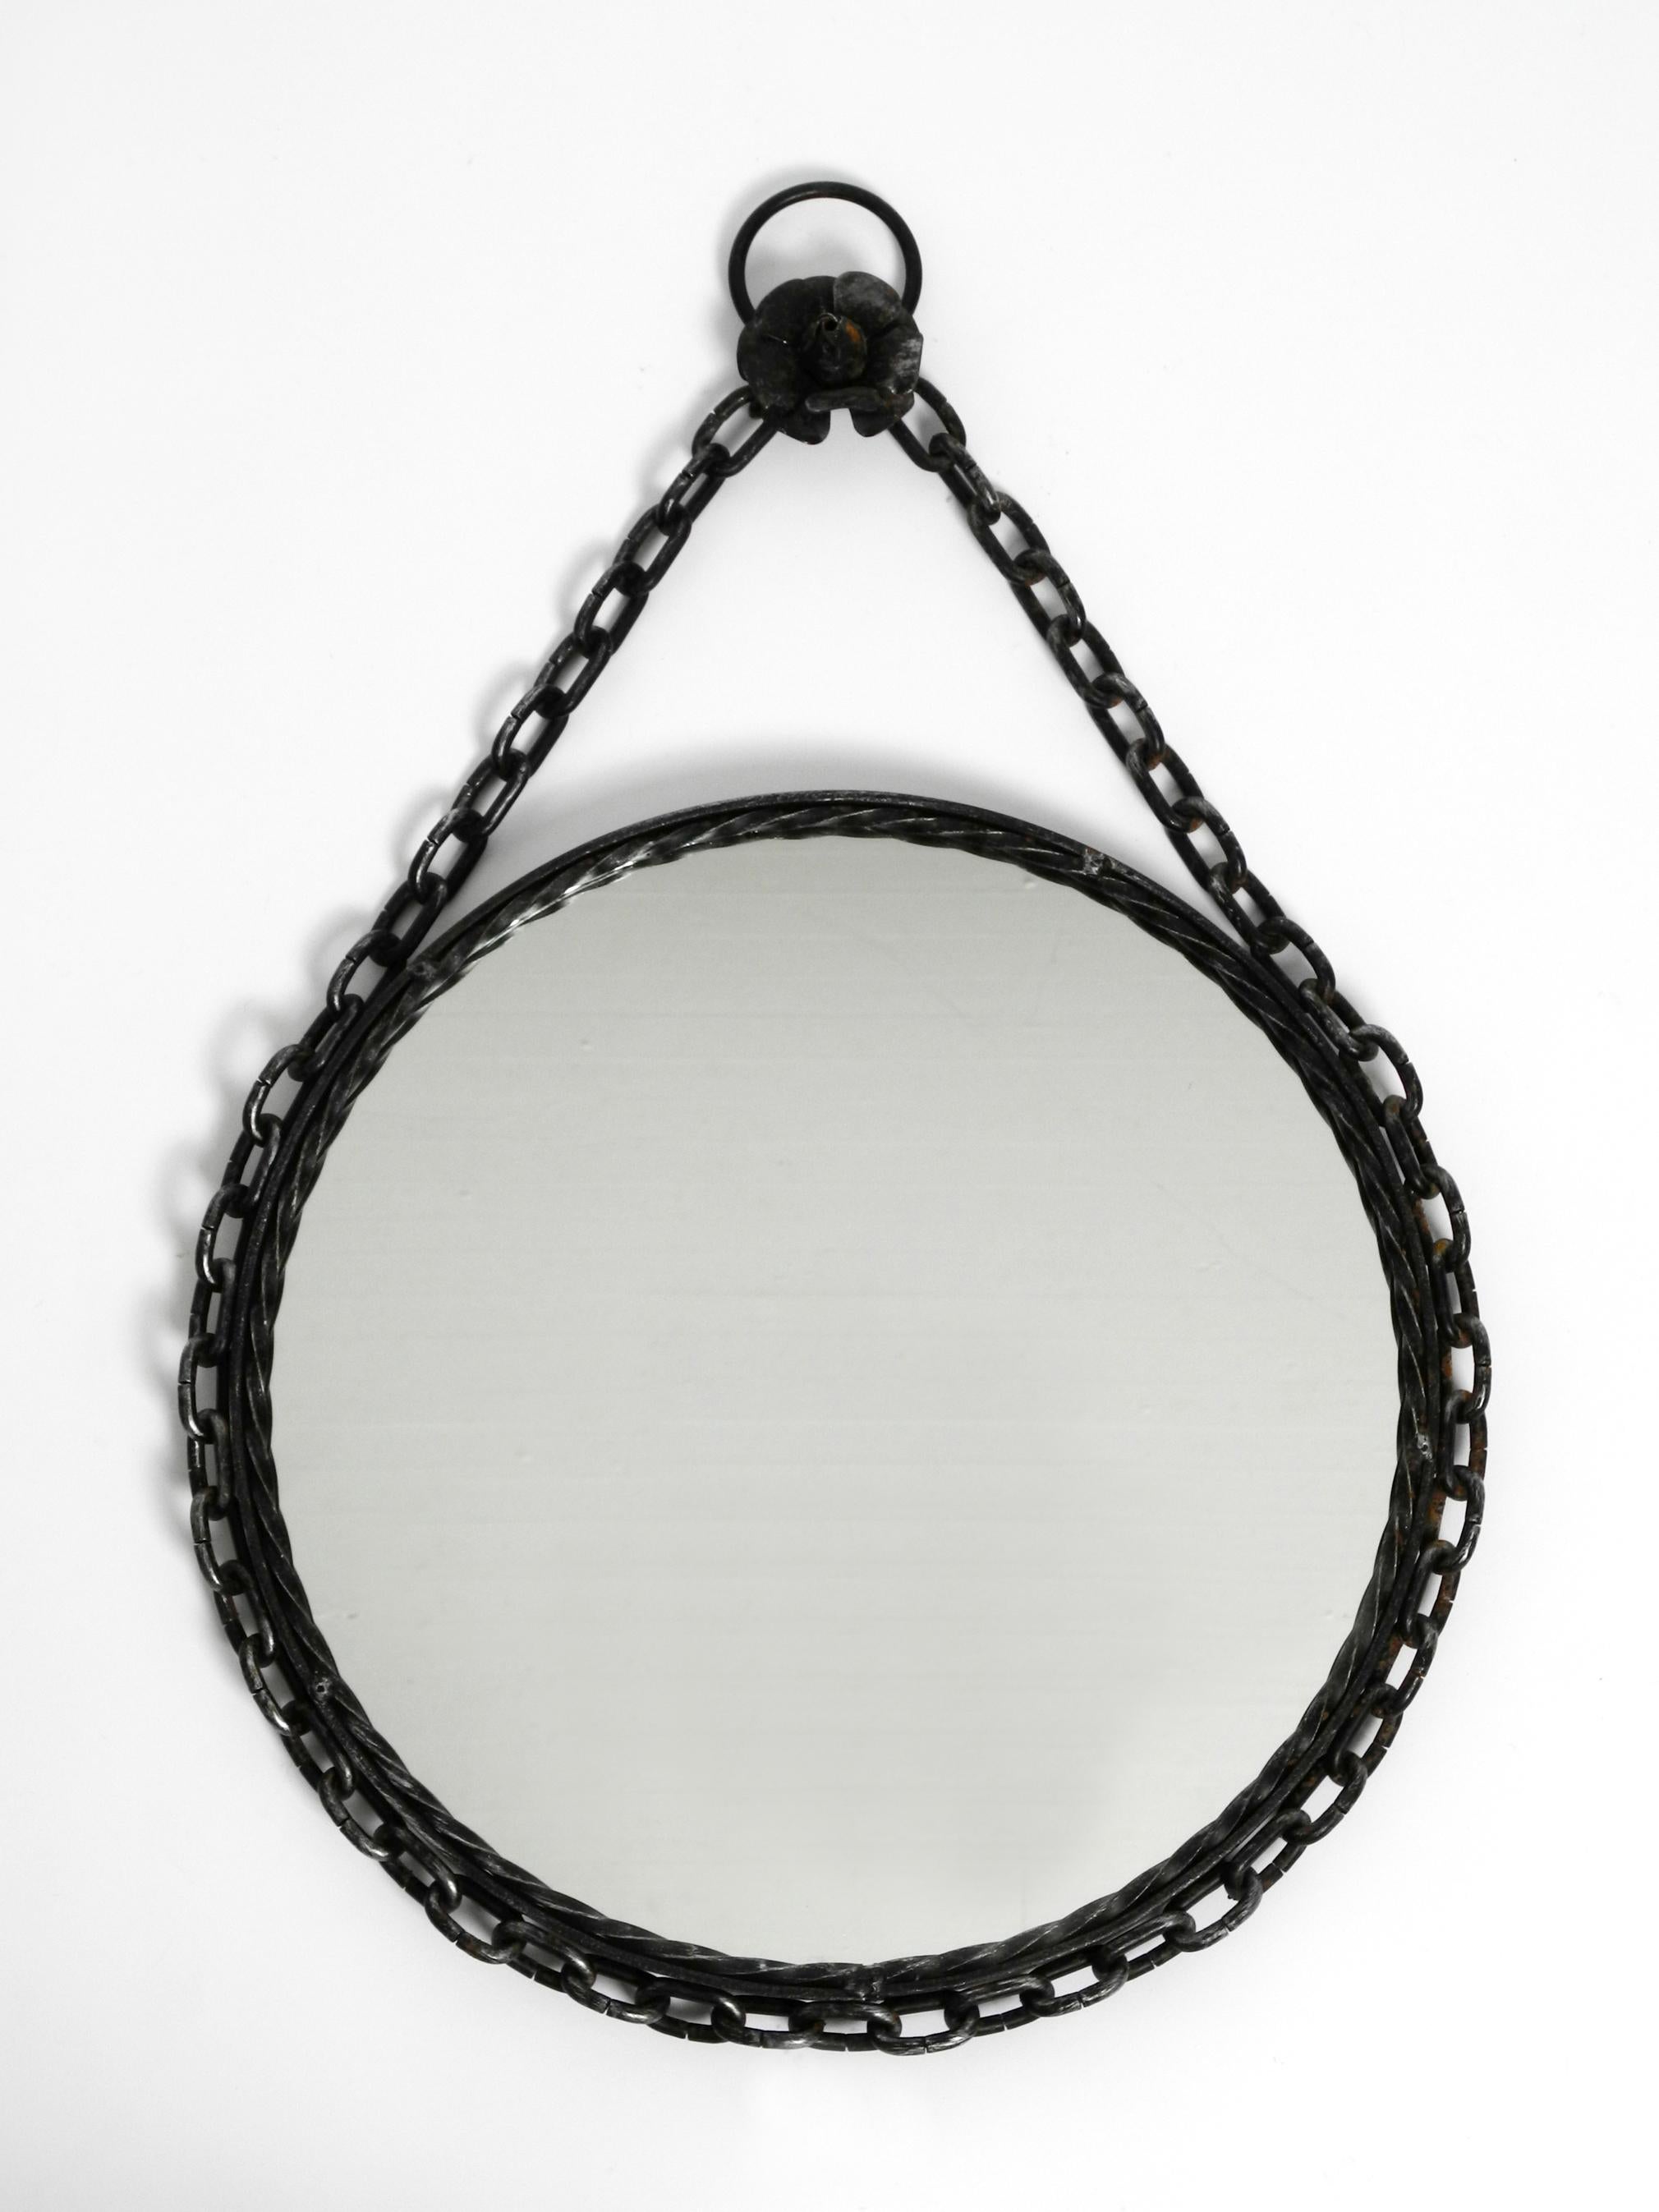 Mid-Century Modern Heavy Brutalist Mid-Century Design Wall Mirror with Wrought Iron Frame and Chain For Sale